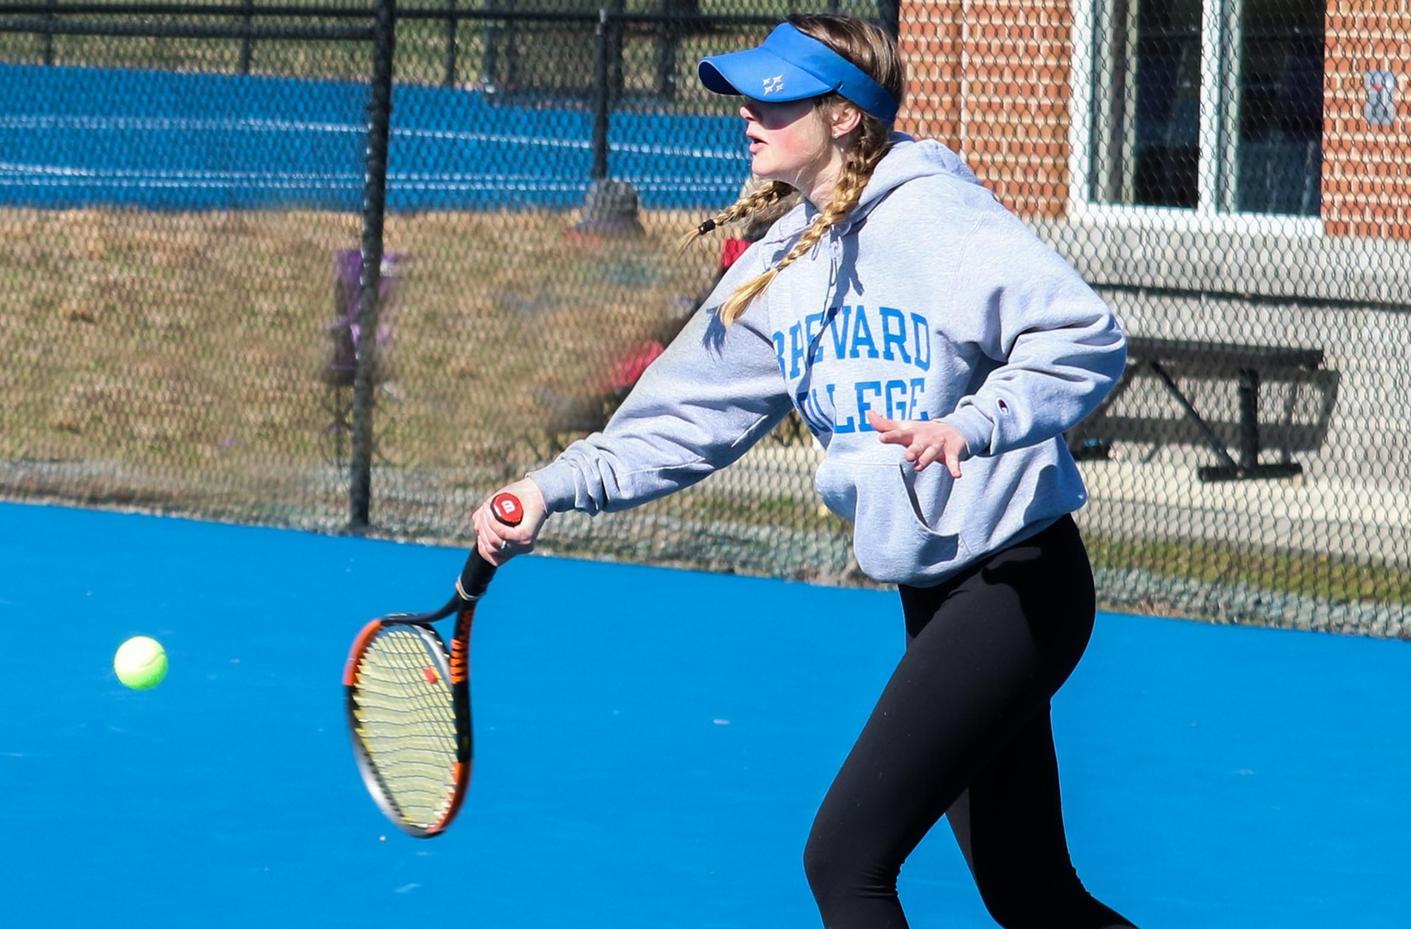 Sophomore newcomer Lily Farr teamed up with senior captain Samantha Sepe for an 8-2 doubles victory in the number-one spot (Photo courtesy of Don Lander).